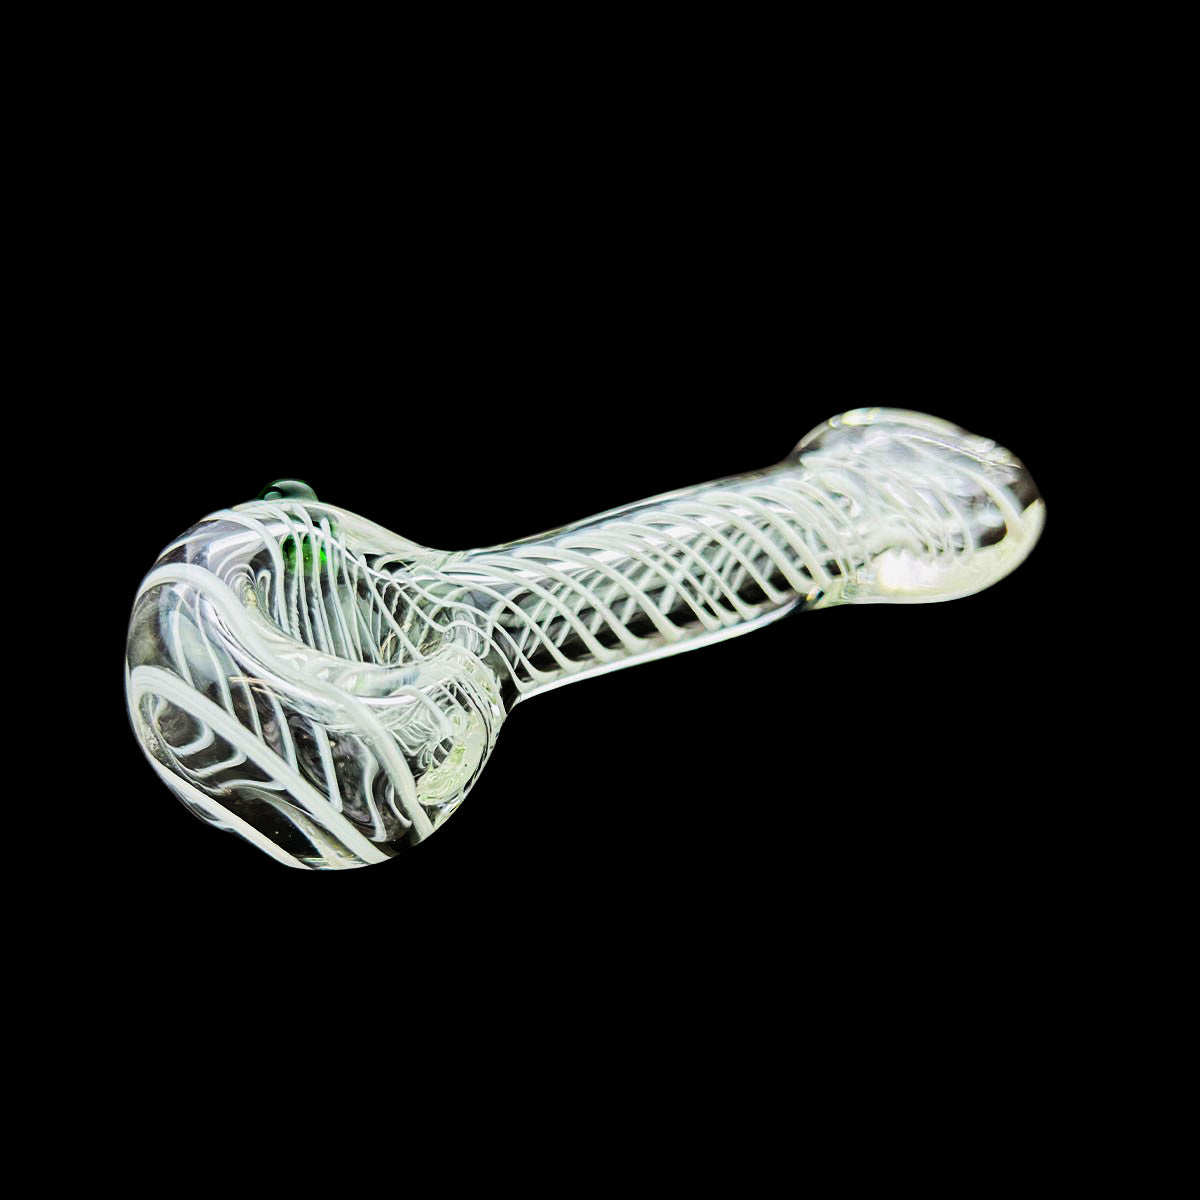 4" Hand Pipe Spoon with Swirling Art